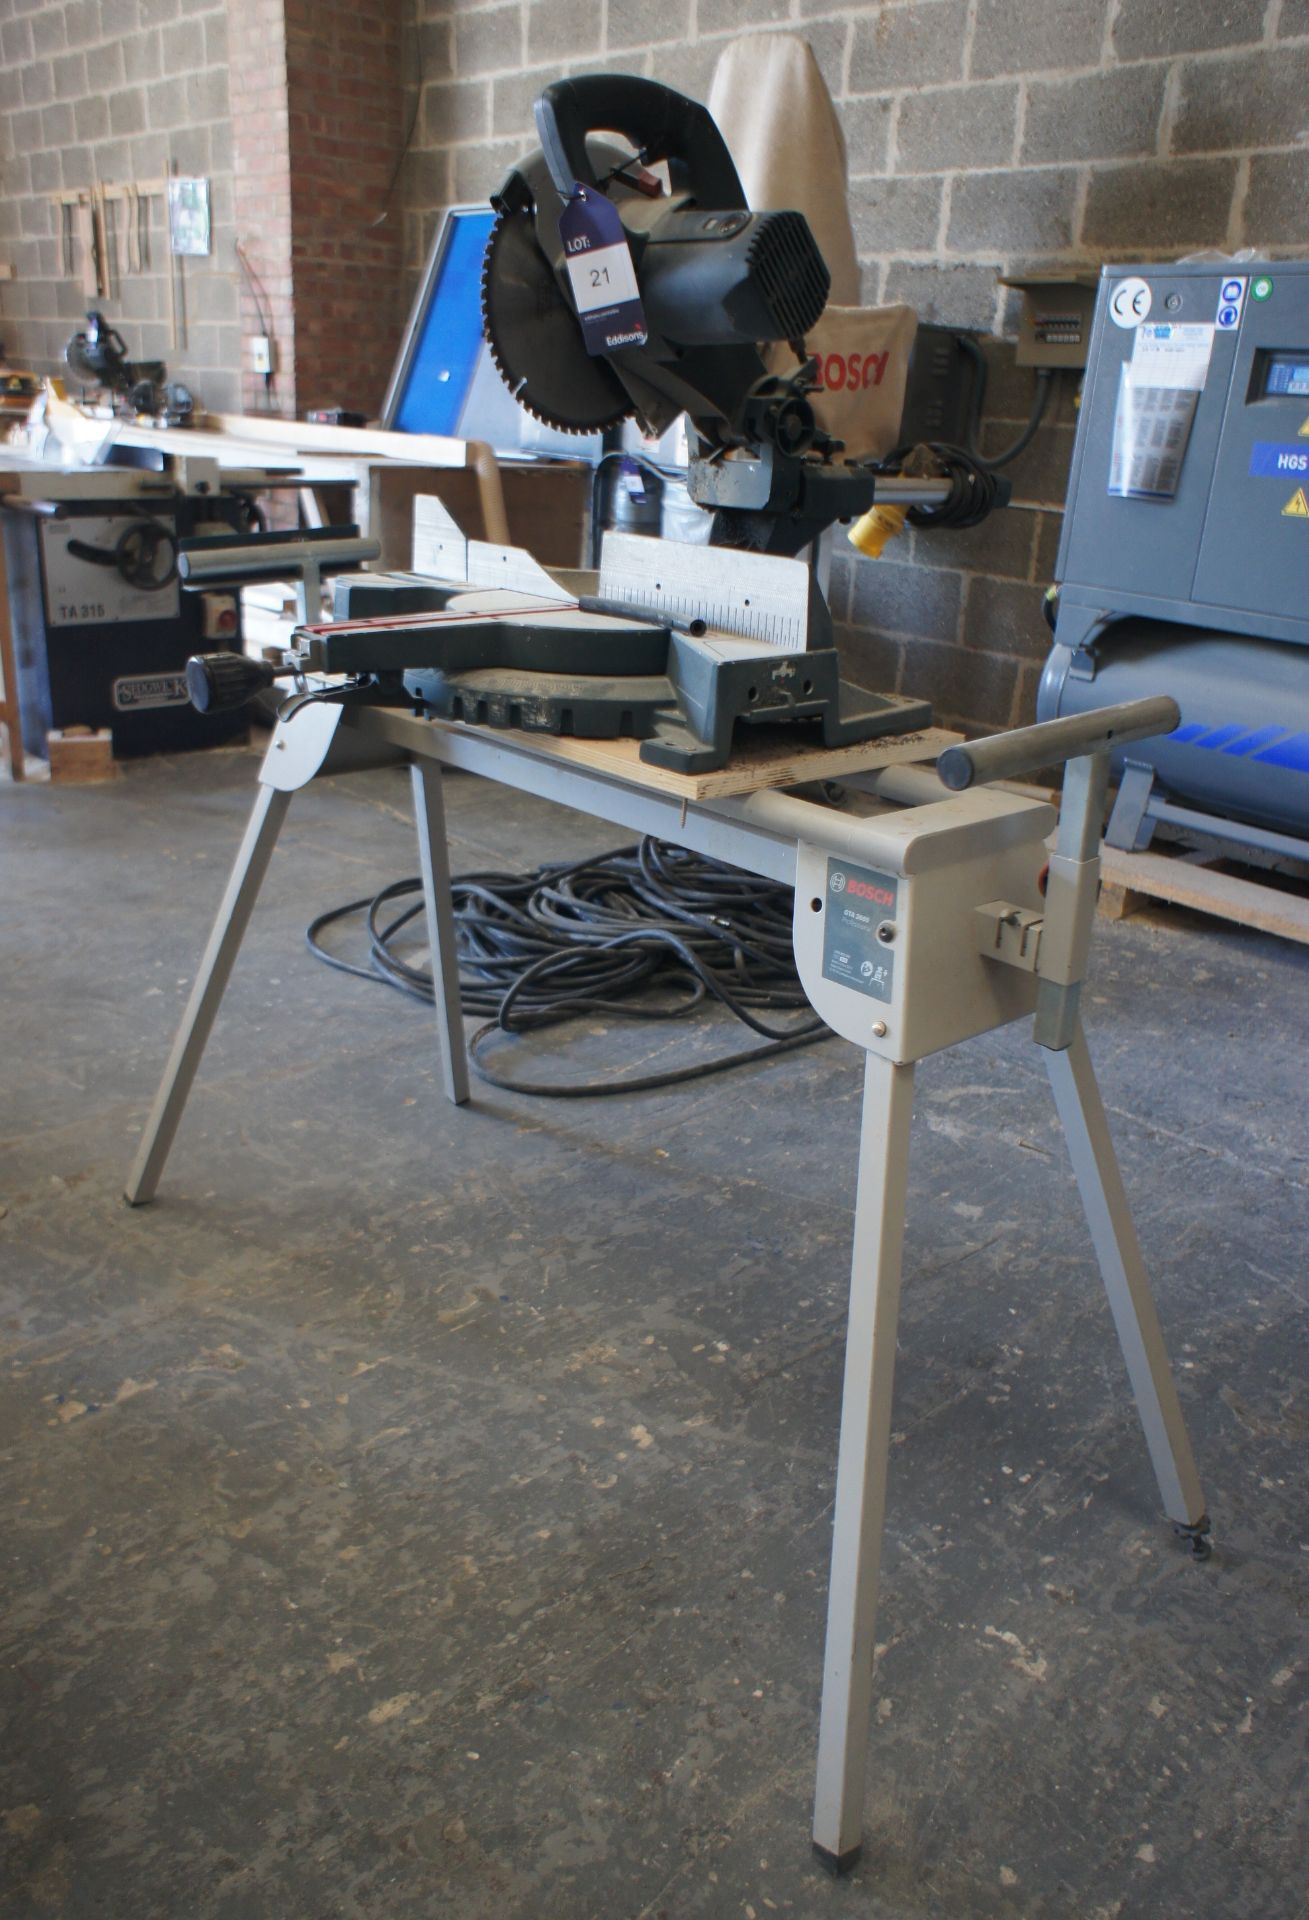 Bosch GCM105 Mitre Saw and GTA 2600 Work Stand